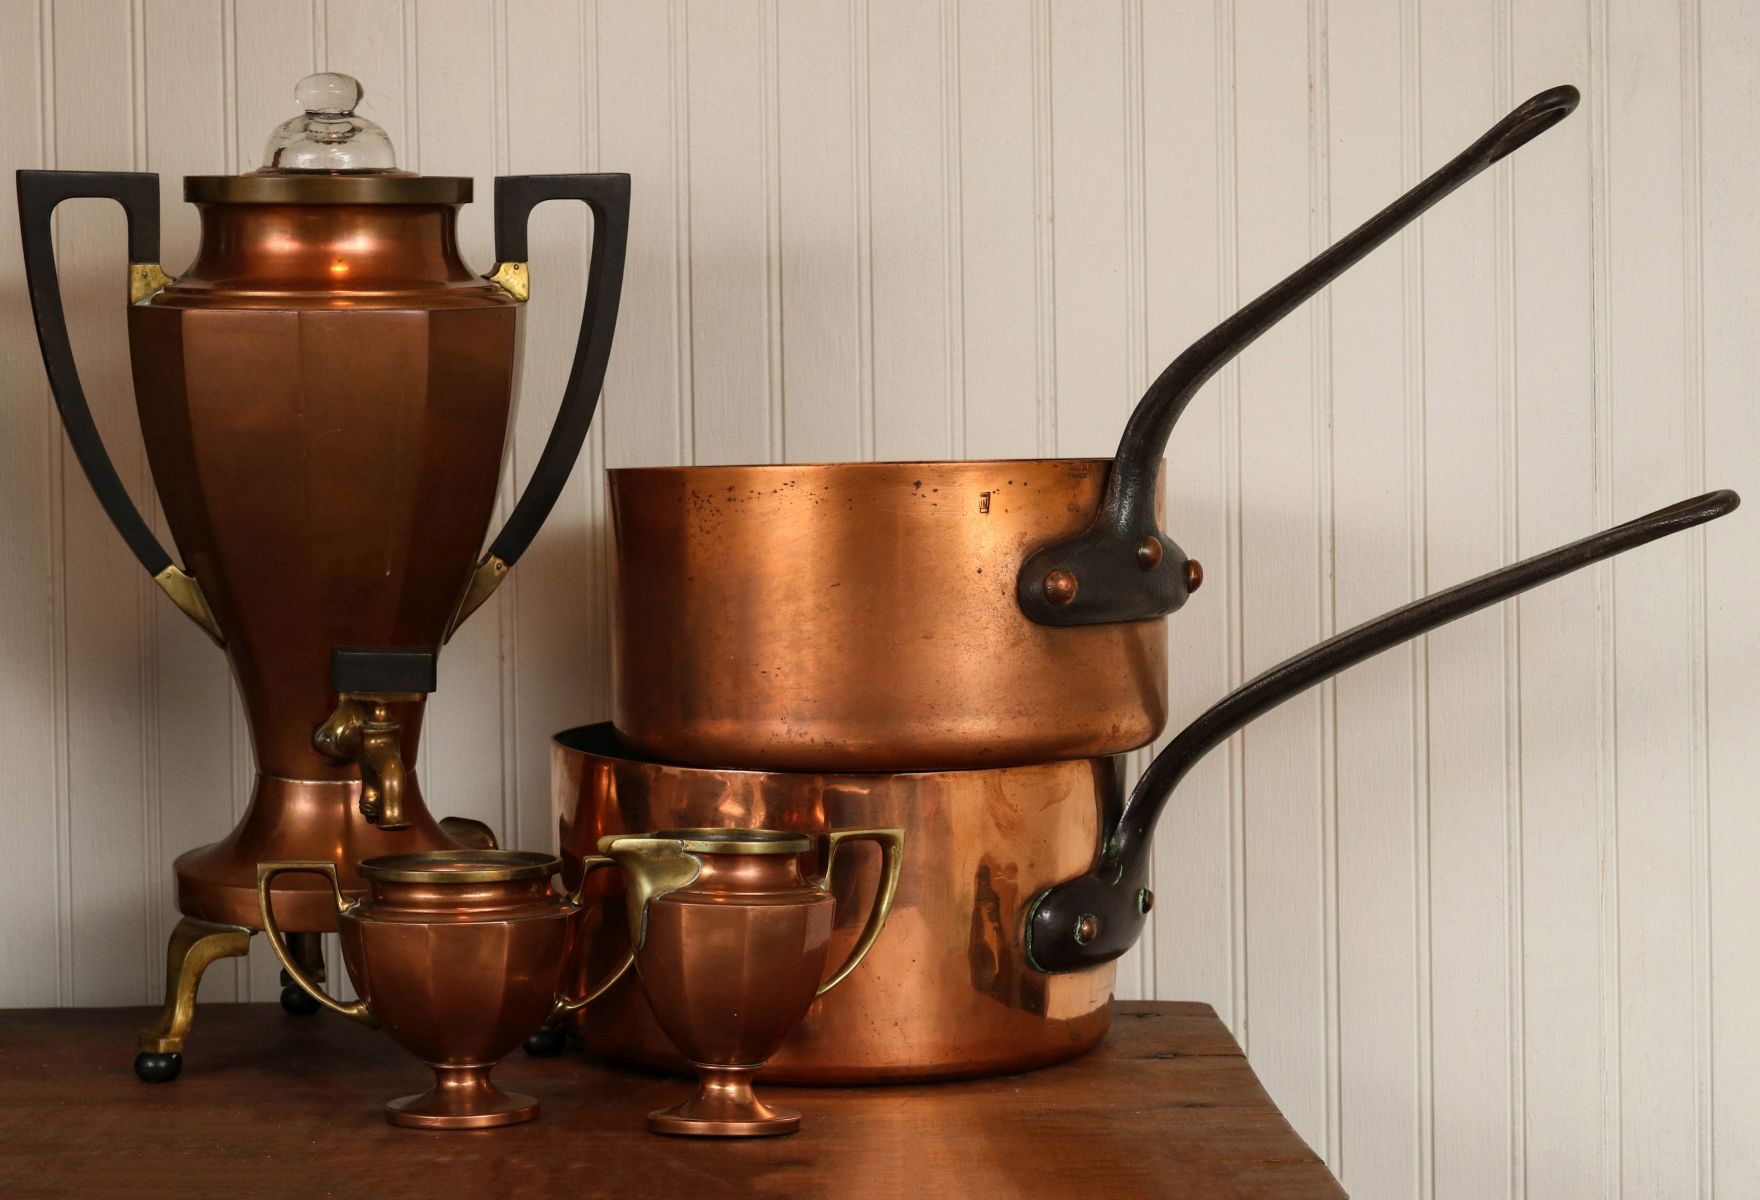 TWO FRENCH COPPER SAUCE PANS WITH IRON HANDLES